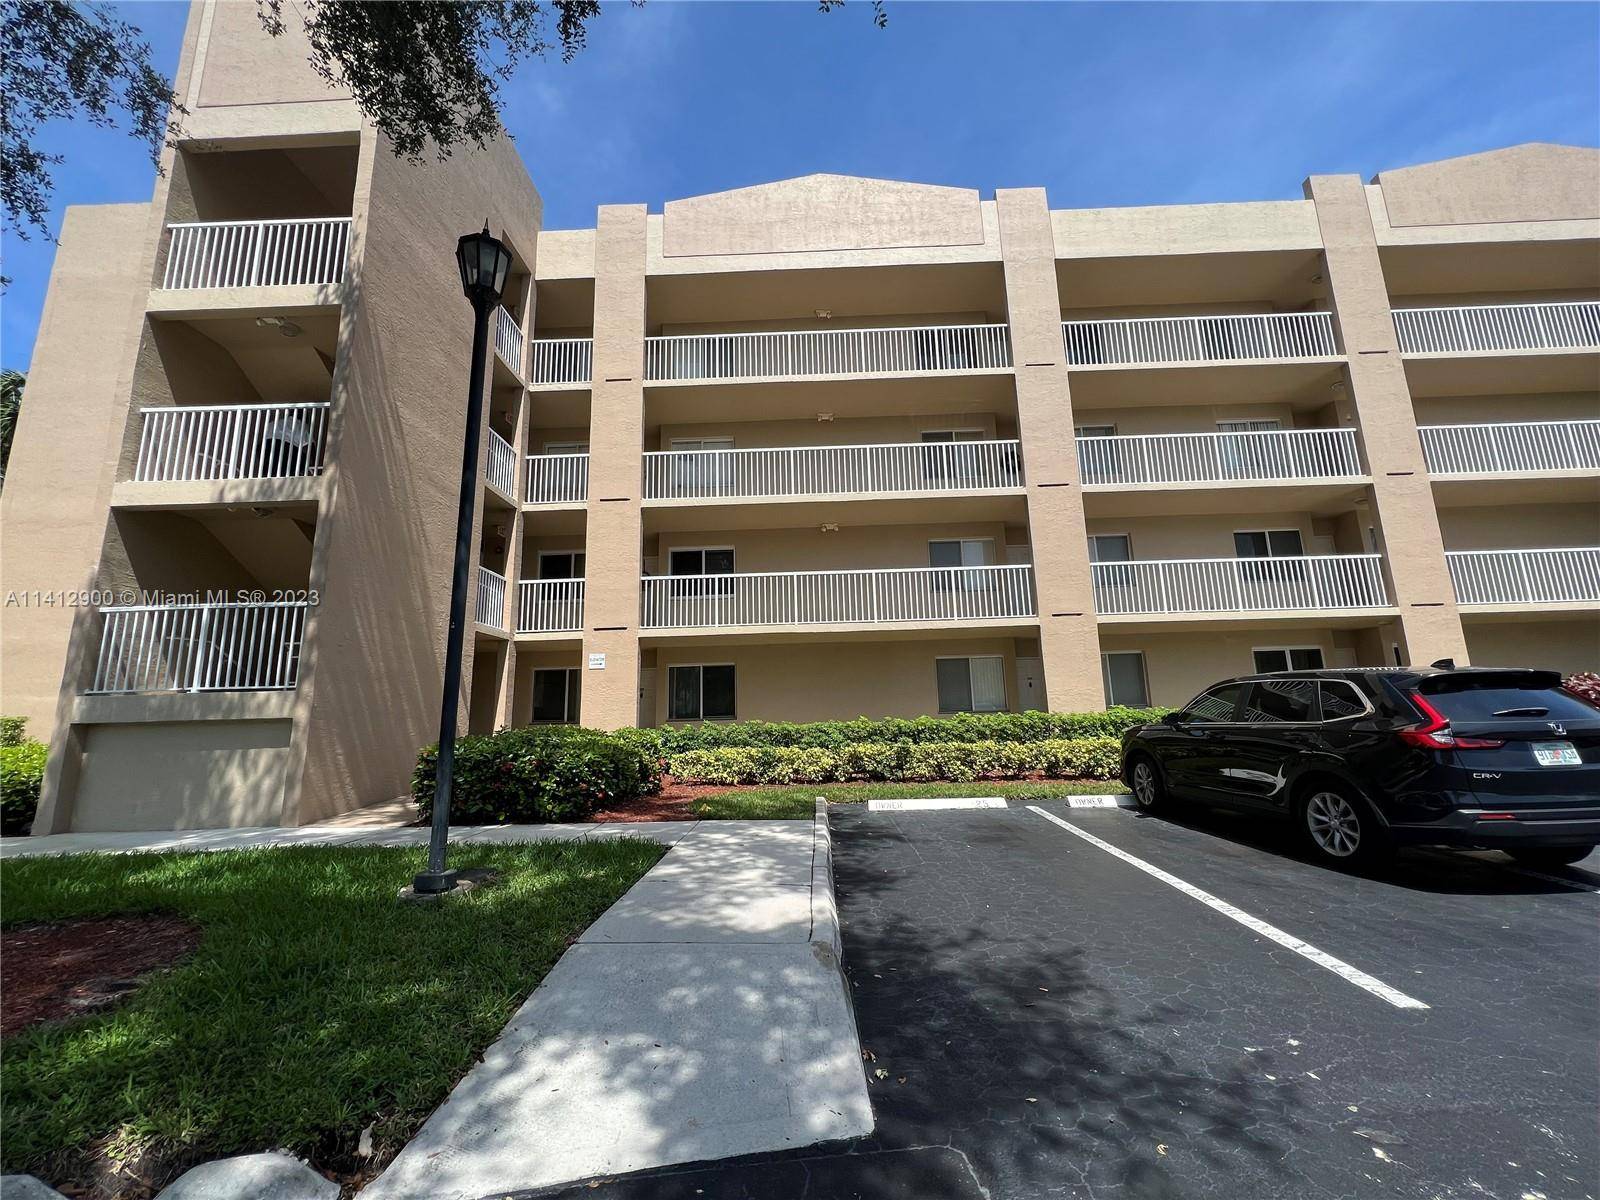 Move in completely remodeled, bright spacious 2 bed 2 bath first floor condo with beautiful lakefront views located in the gated community of Weldon, a resort lifestyle in Kings Point ...